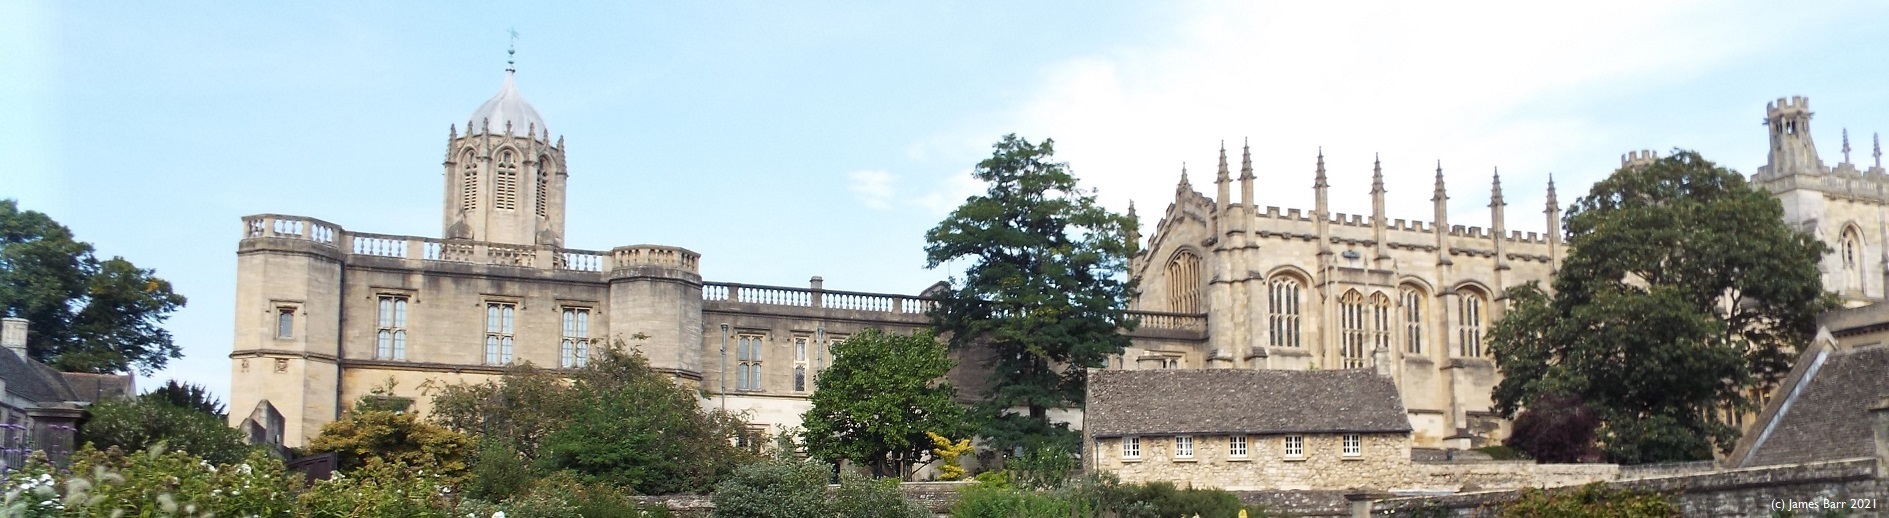 Image of Christchurch College